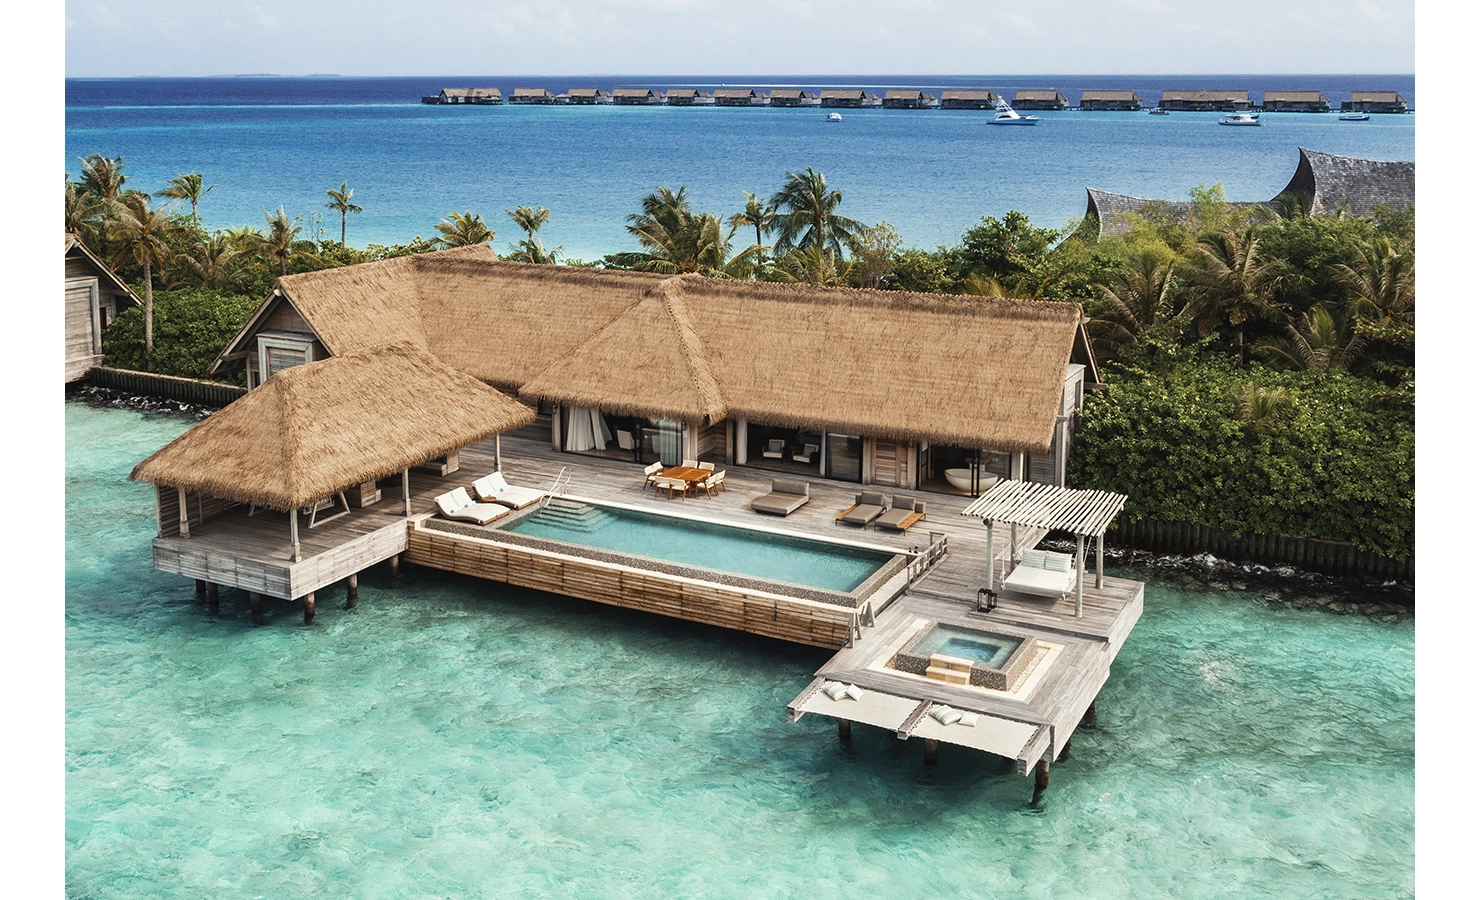 Perfect Hideaways, Waldorf Maldives, Luxury accommodation house with pool above ocean next to beach